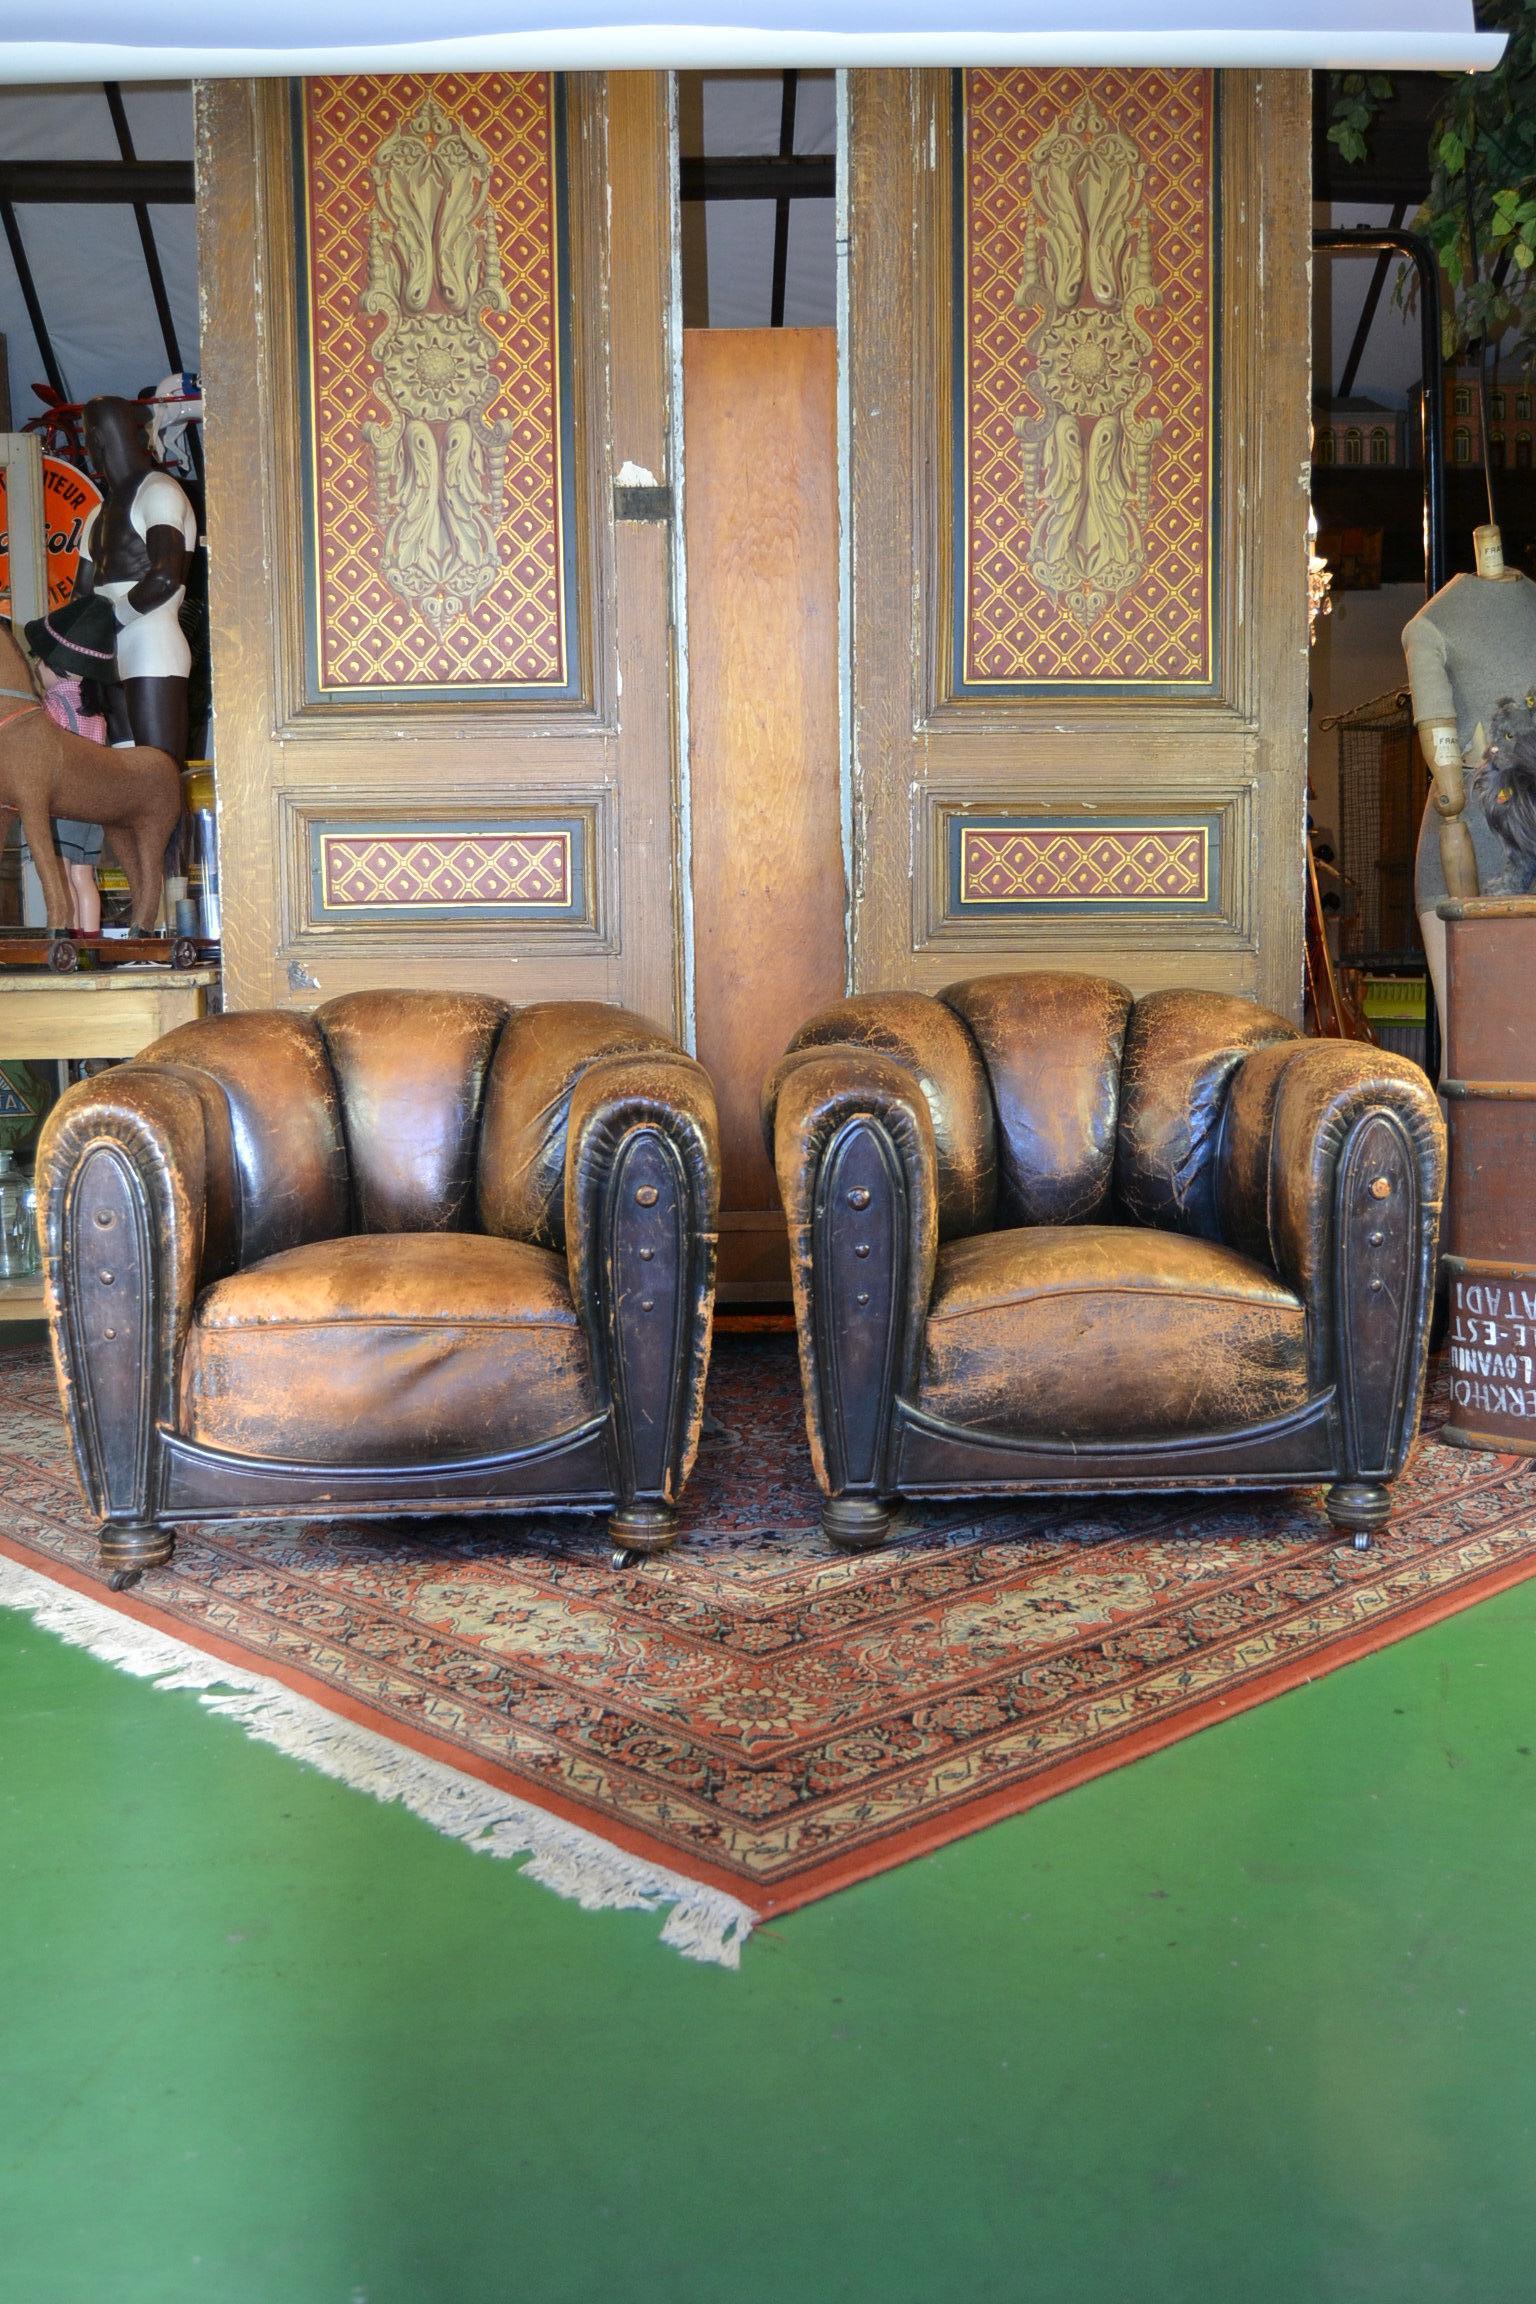 Antique Art Deco Brown Leather Club Chairs  - Armchairs with Great Aged Patina.
Vintage Club Chairs - Cigar Arm Moustache Chairs with rounded seat backs and also leather fronts.
These stylish club chairs have a great shape due his Shell Back and